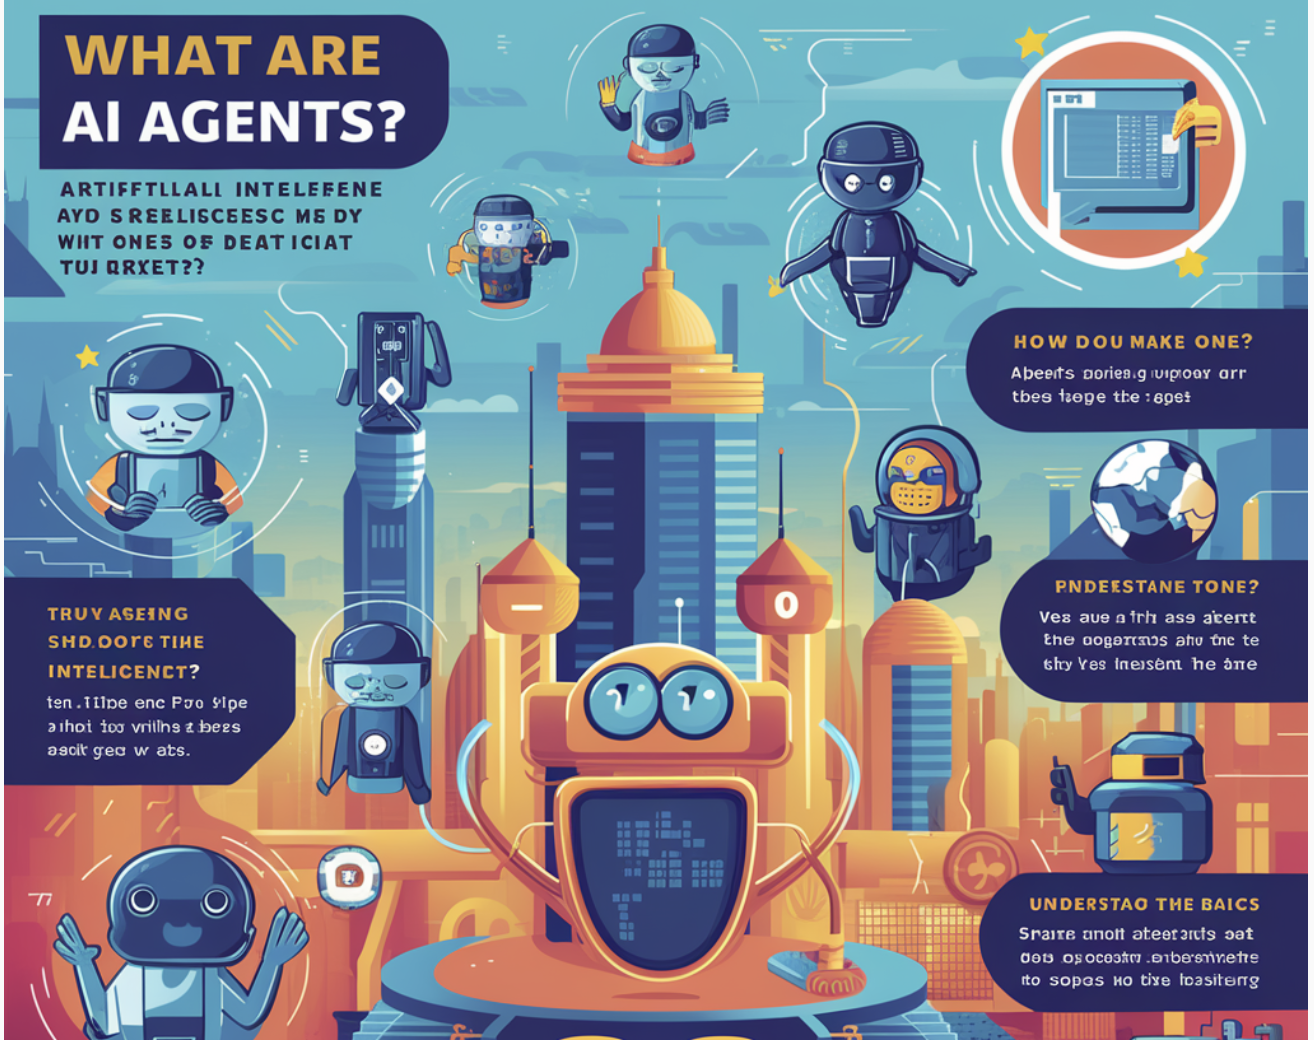  What are AI Agents? How do you make one? Understand the Basics